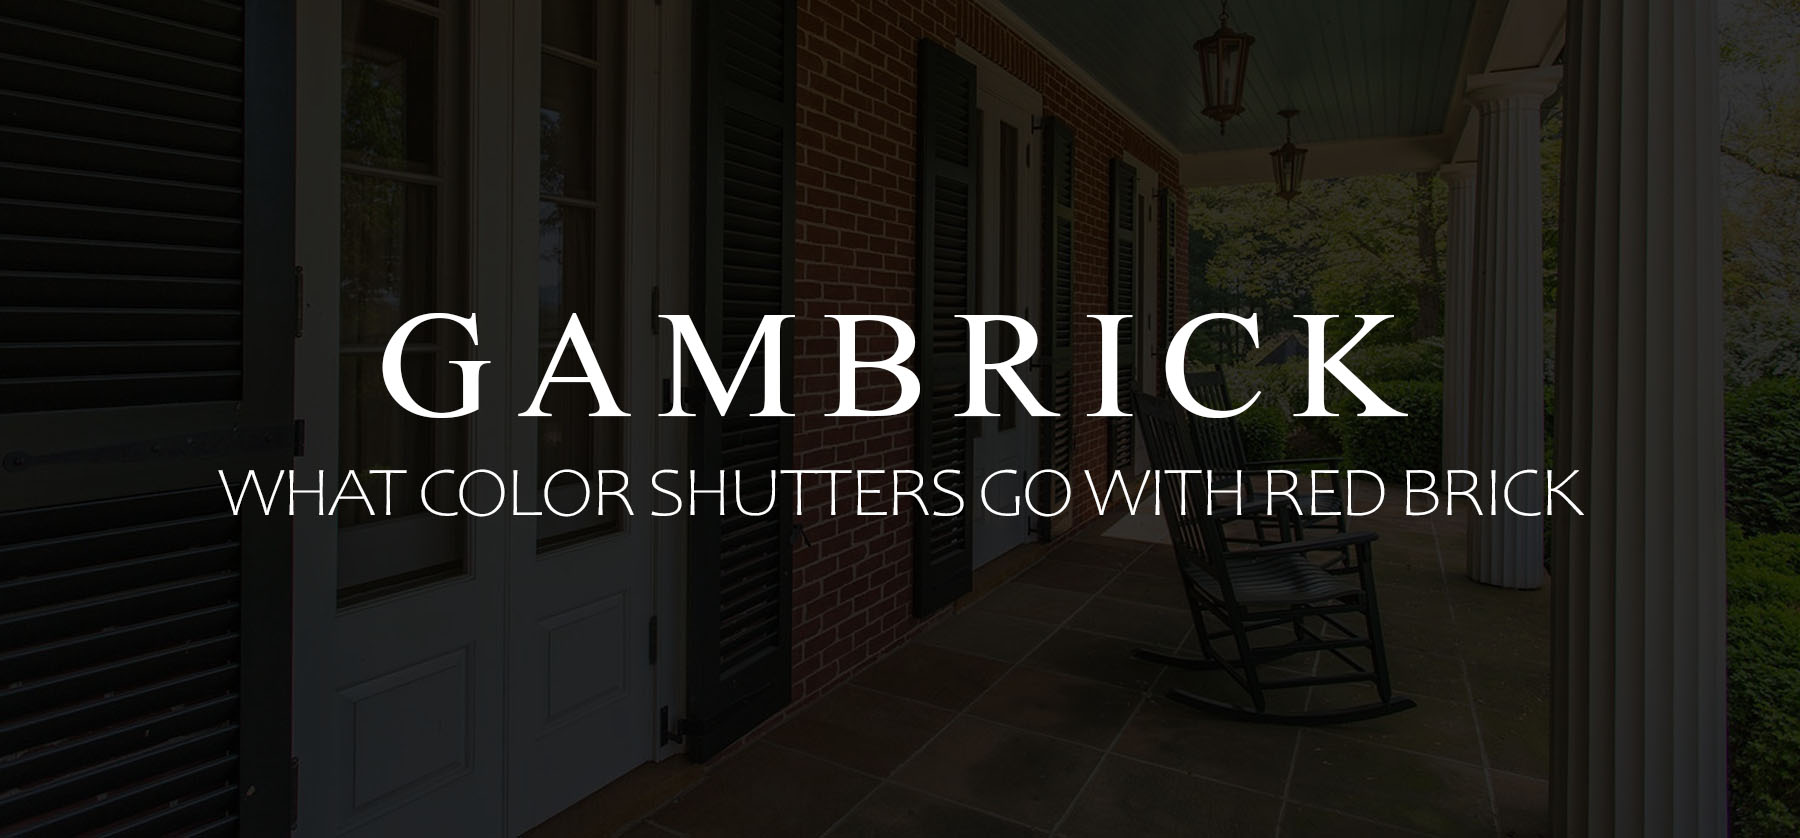 What color shutters go with red brick